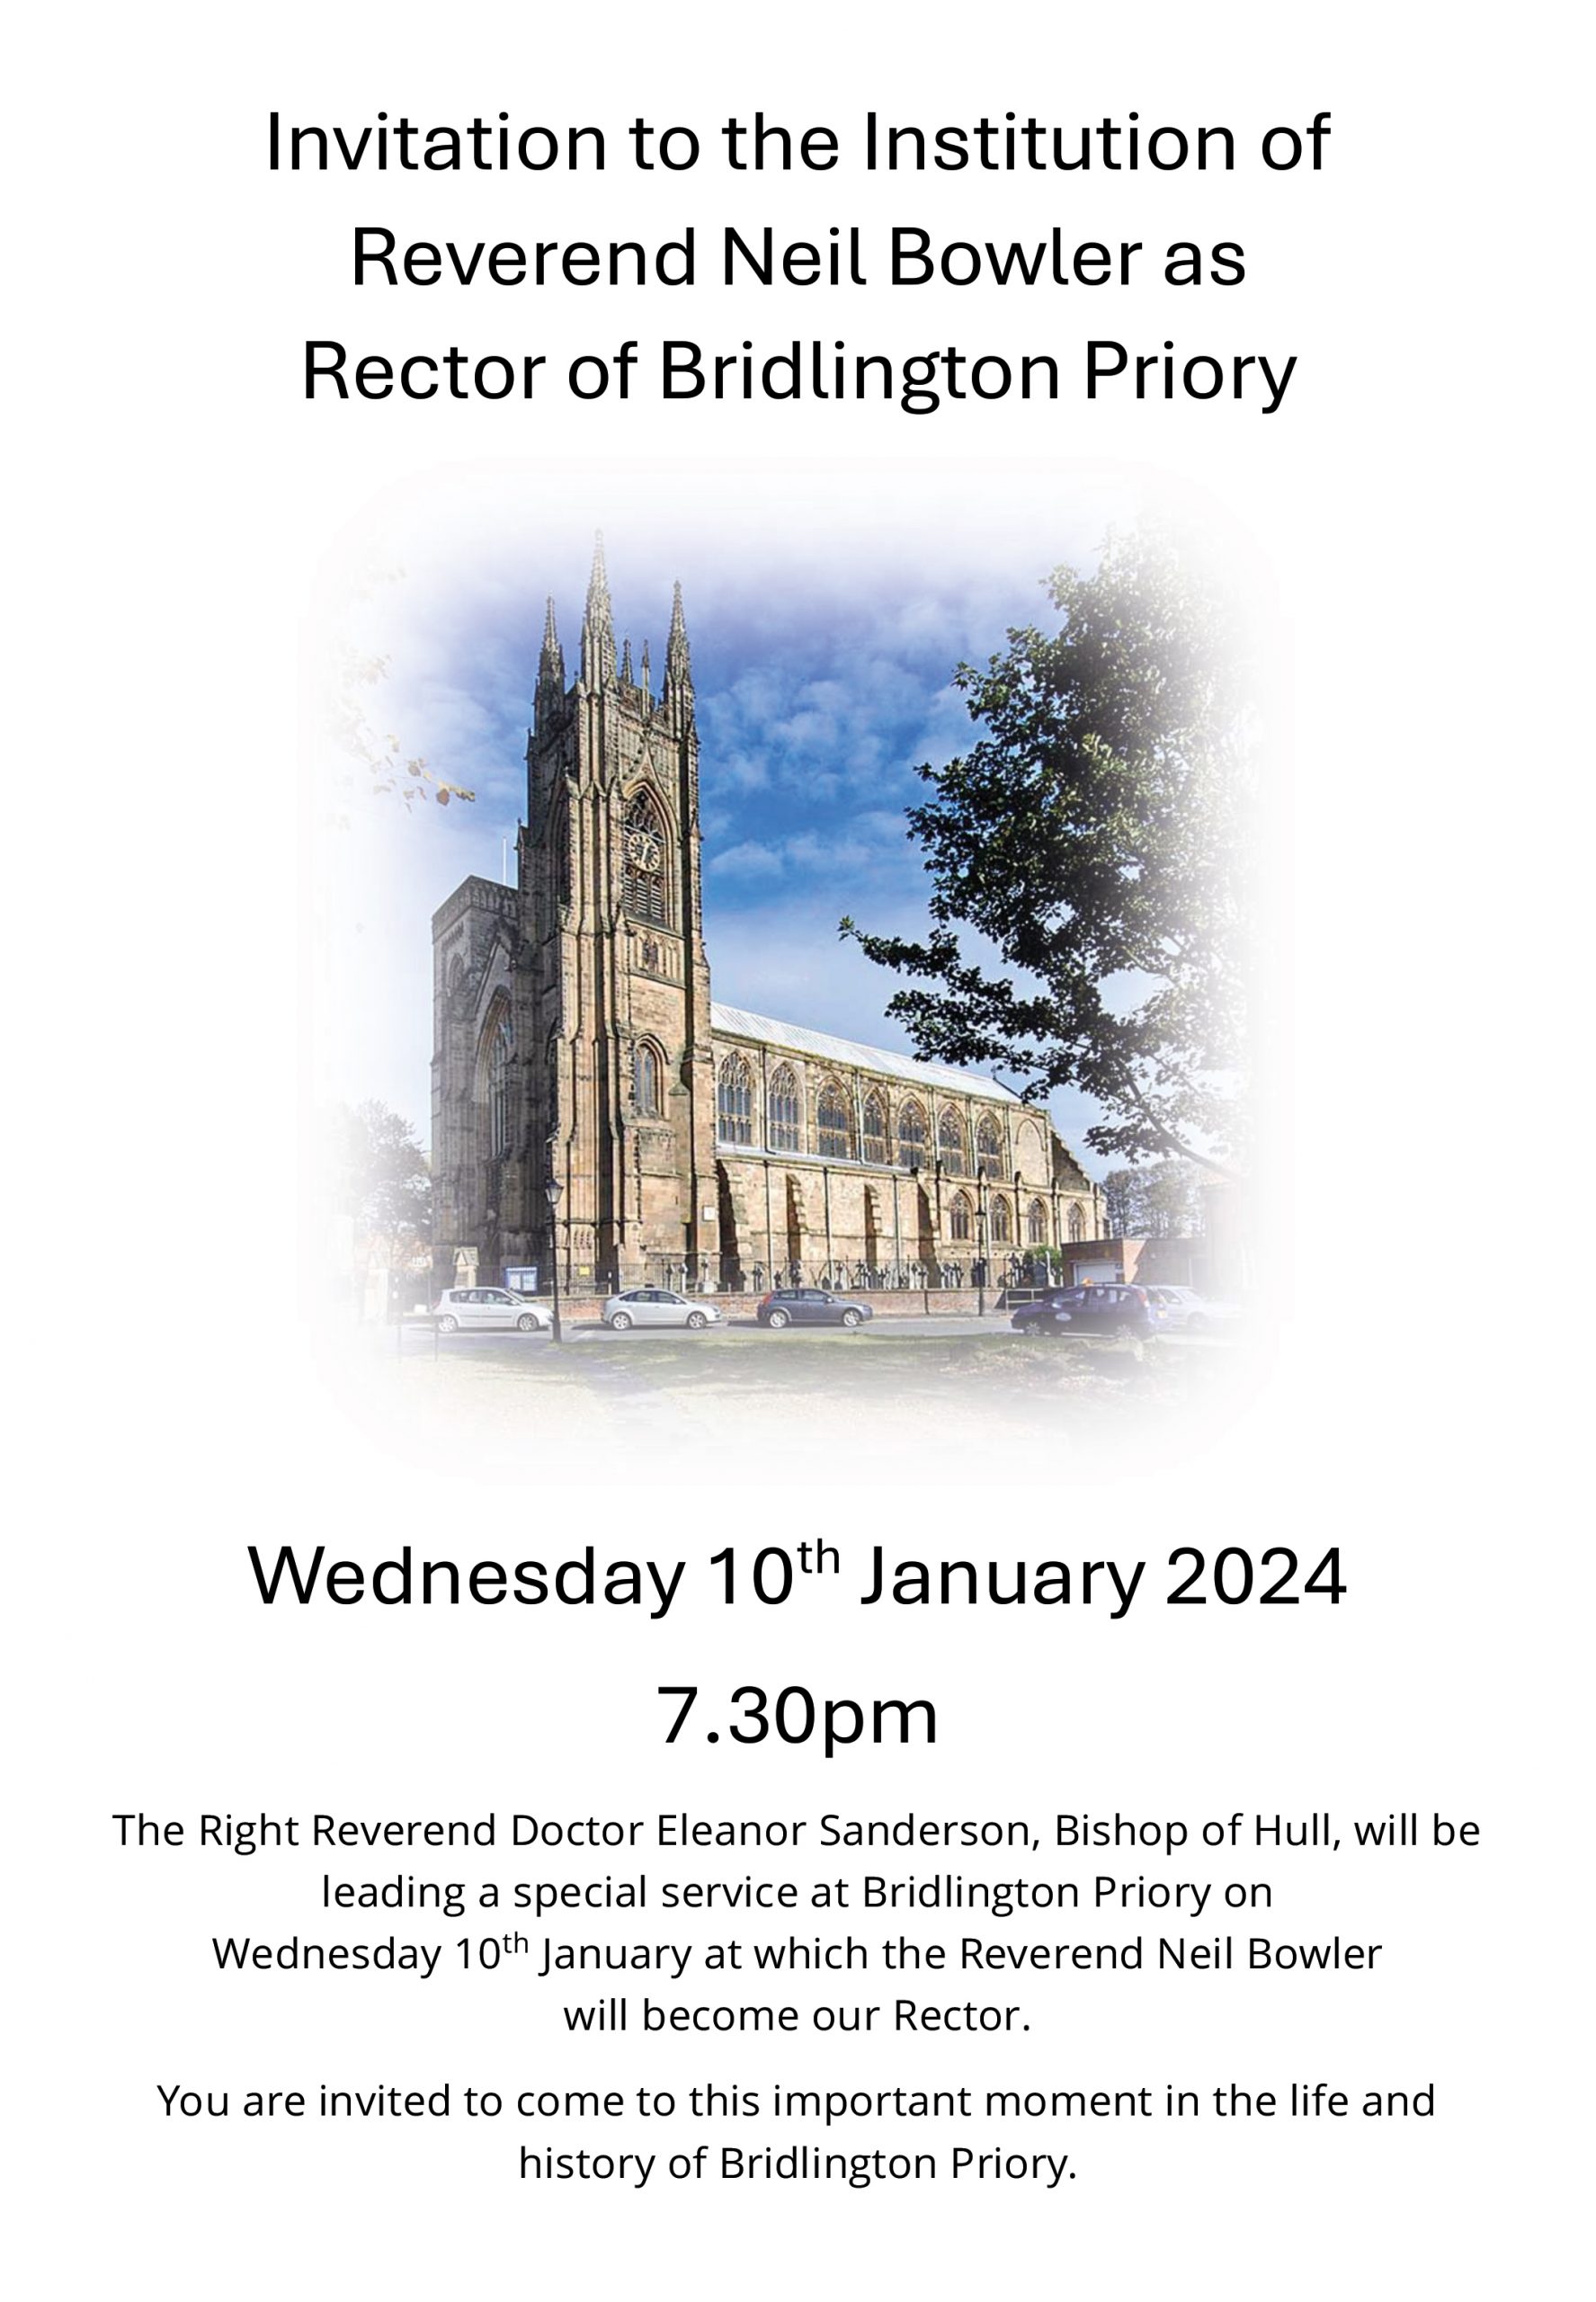 Invitation to the Institution of Reverend Neil Bowler as Rector of Bridlington Priory